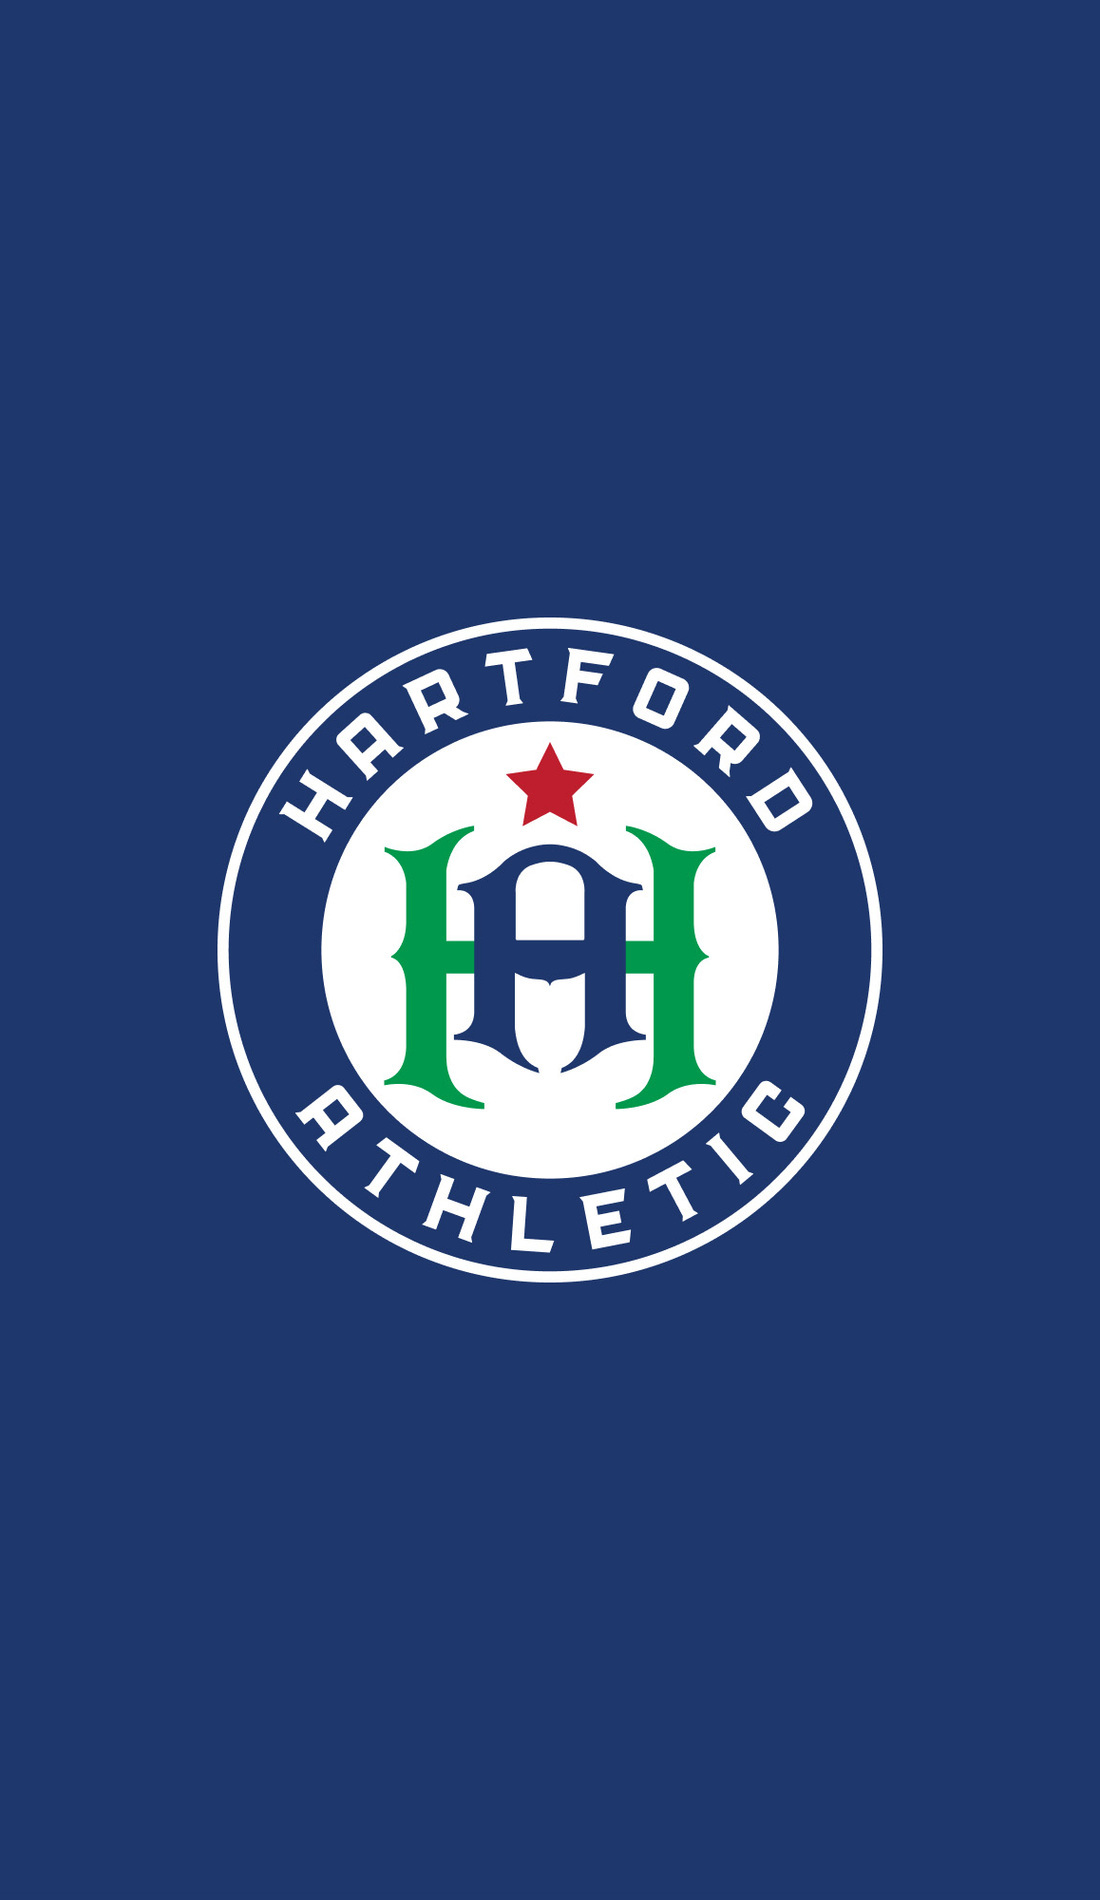 A Hartford Athletic live event